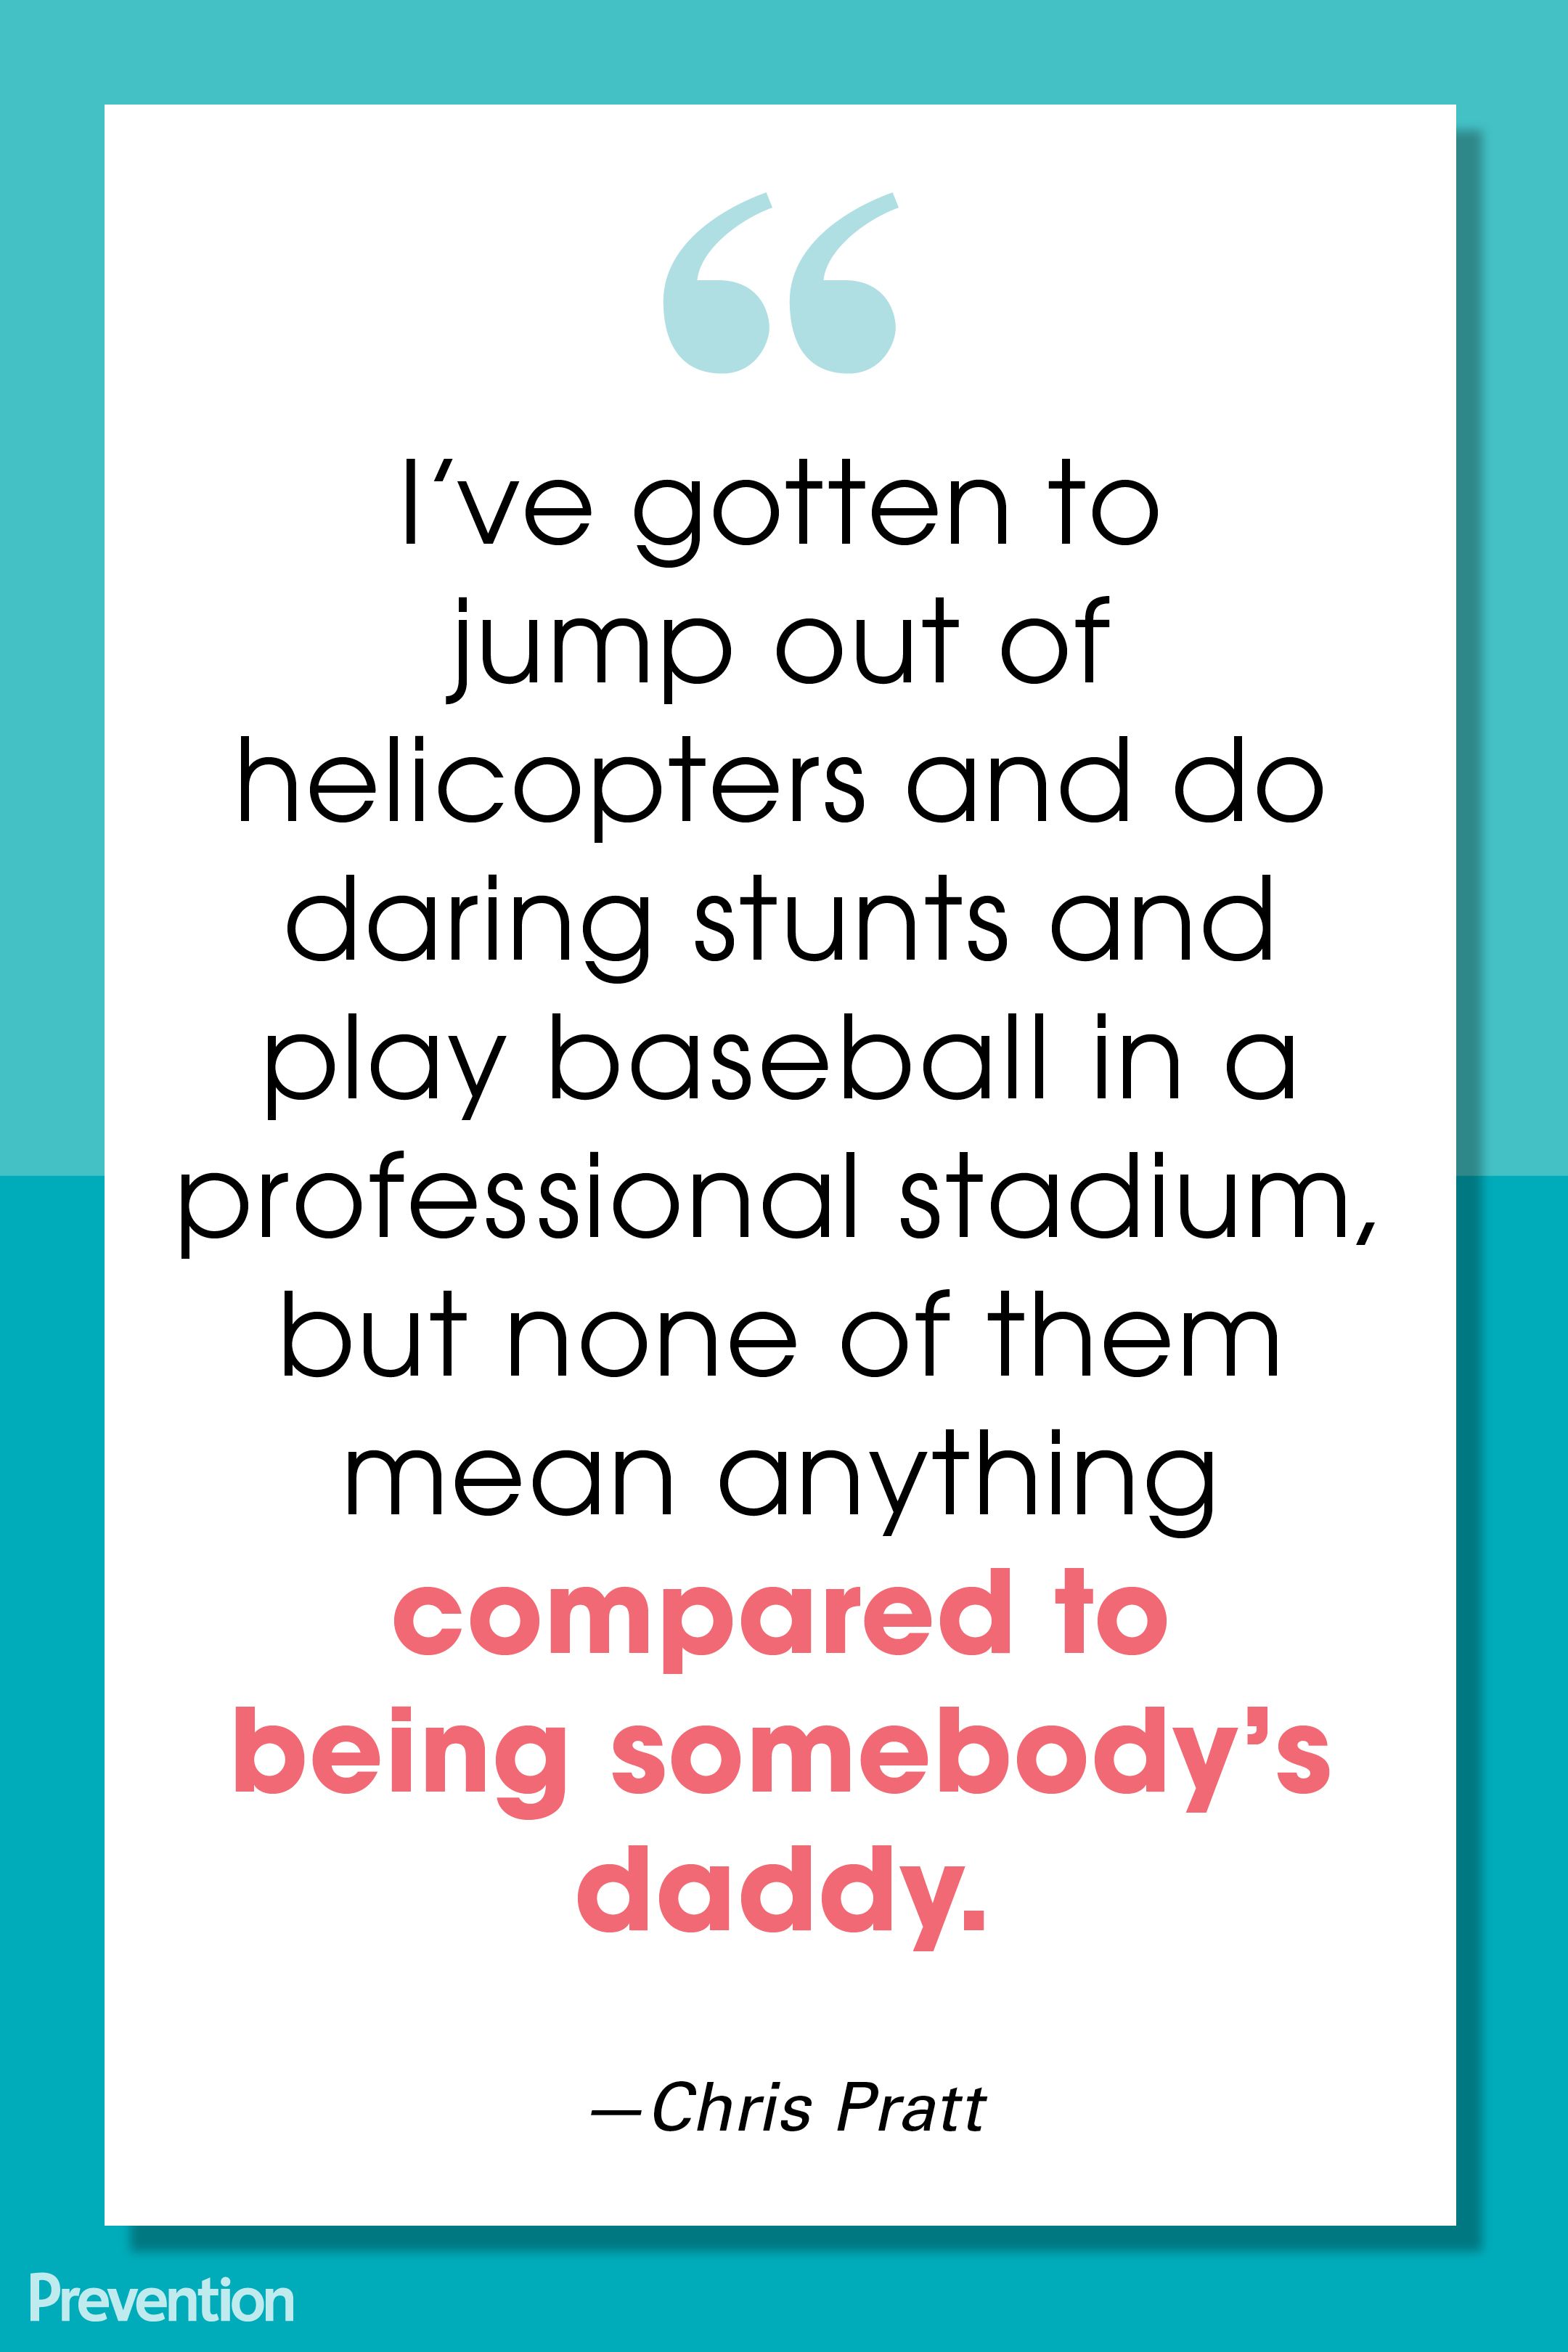 32 Fatherhood Quotes from Celebrity Dads - Heartwarming Dad Quotes